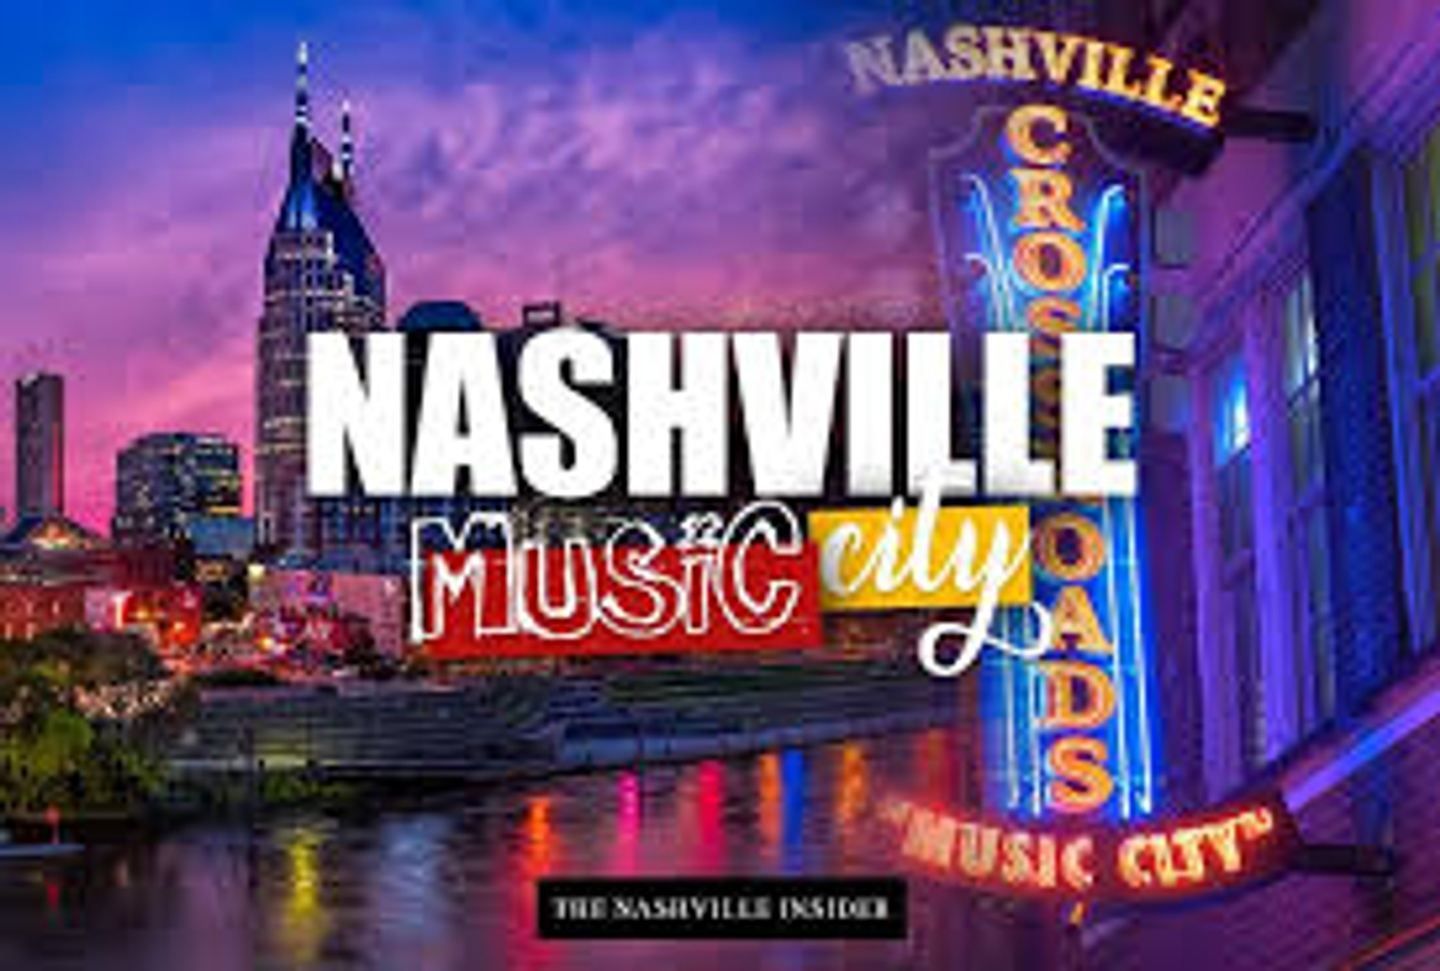 NASHVILLE and MEMPHIS, TENNESSEE